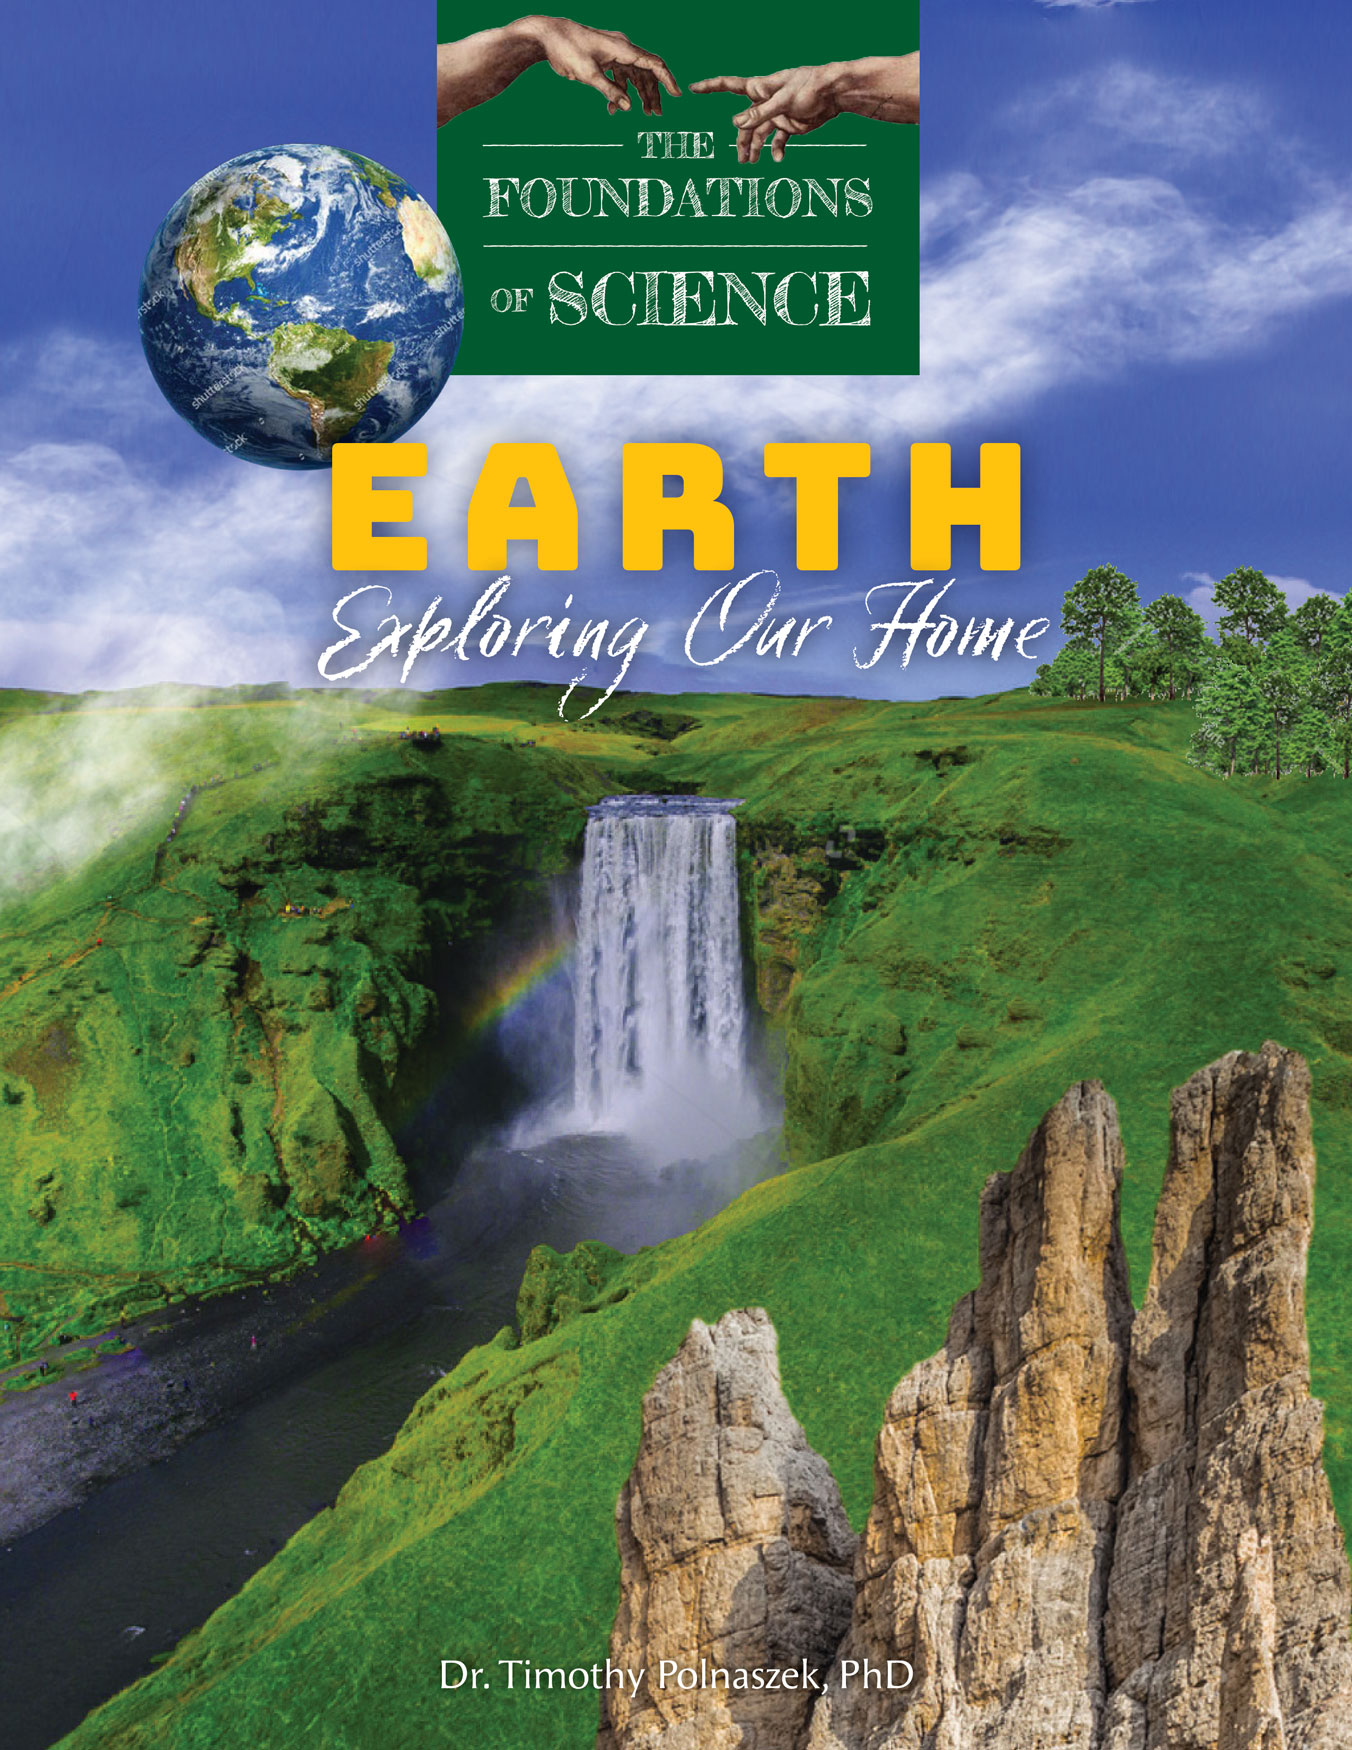 Foundations of Science Earth Exploring Our Home Textbook / Timothy Polnaszek